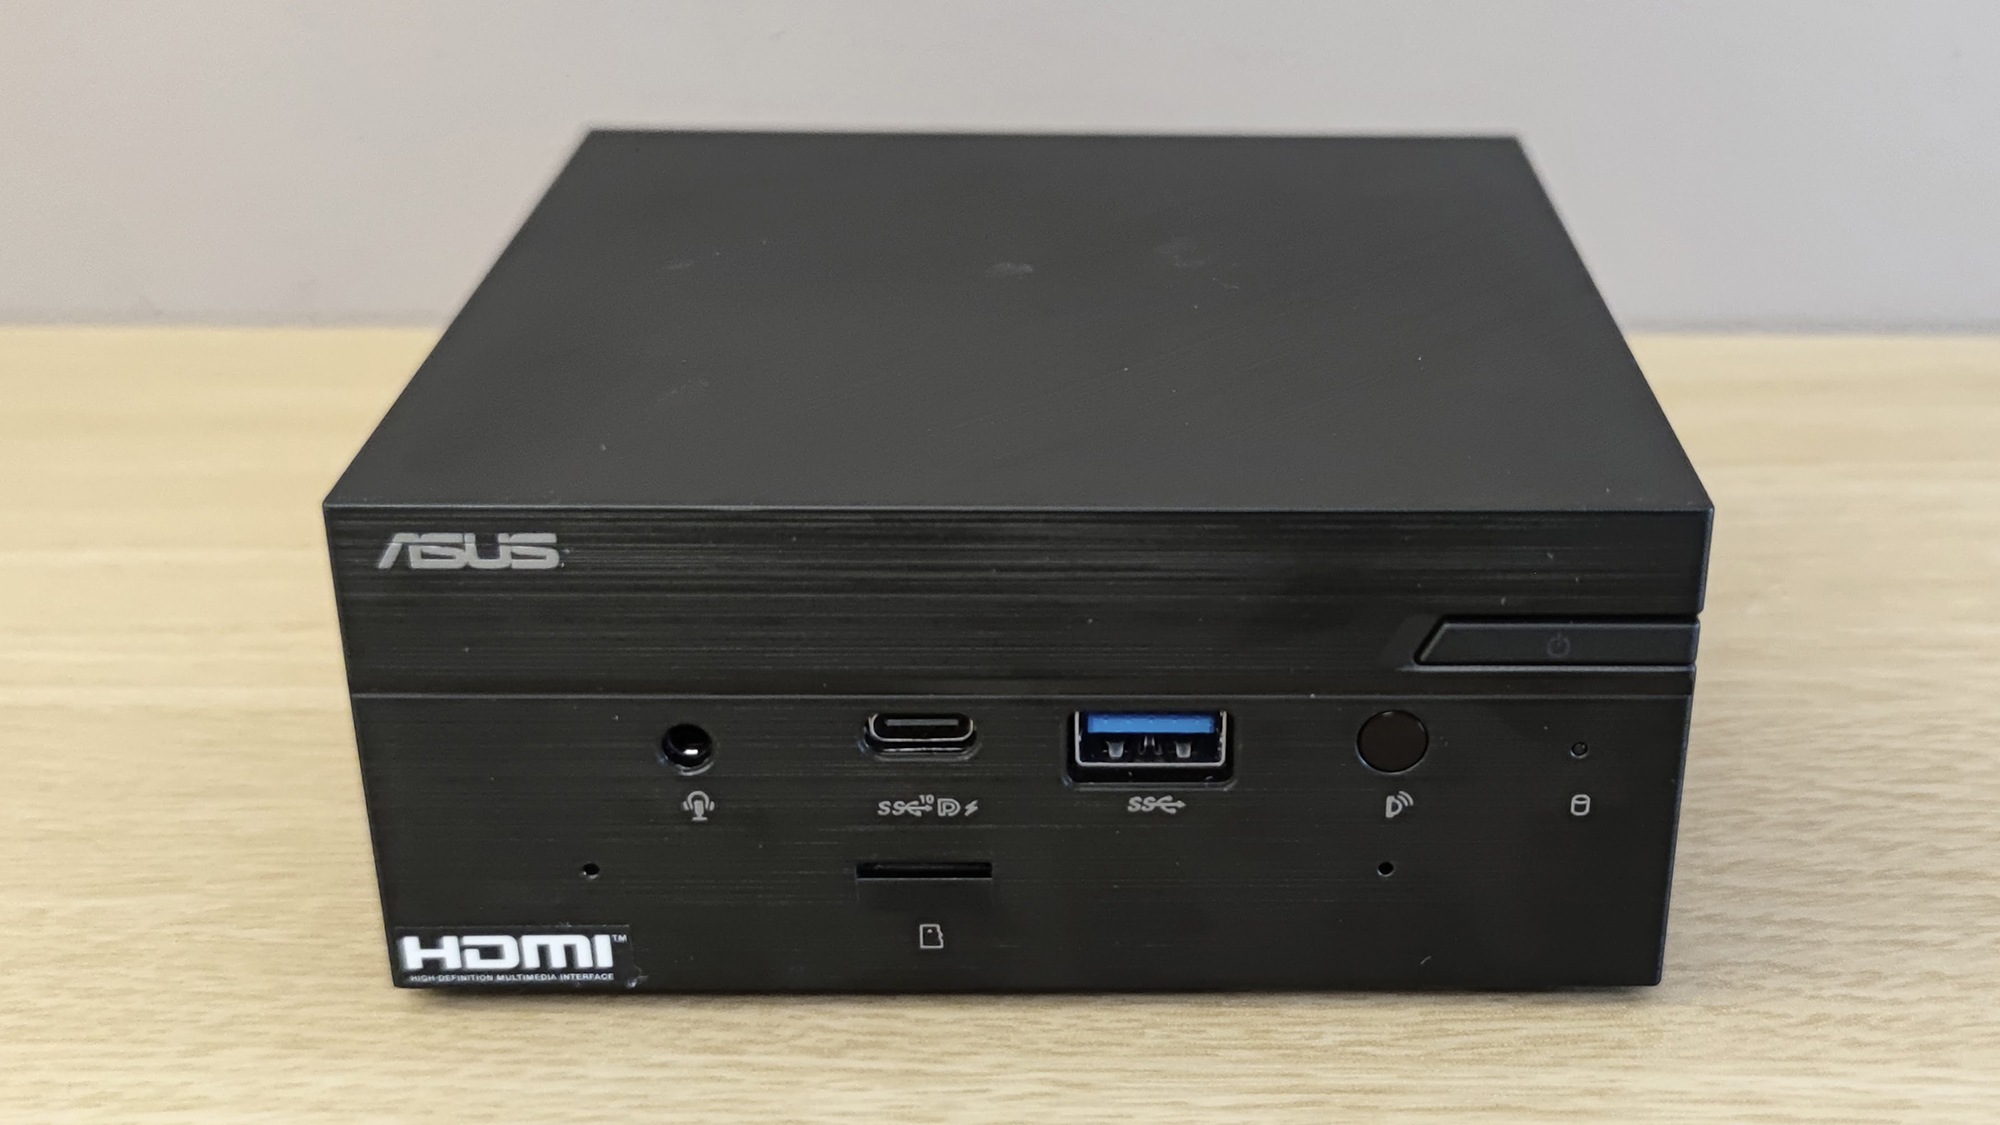 ASUS PN51 Mini PC review: This AMD-powered compact workstation is